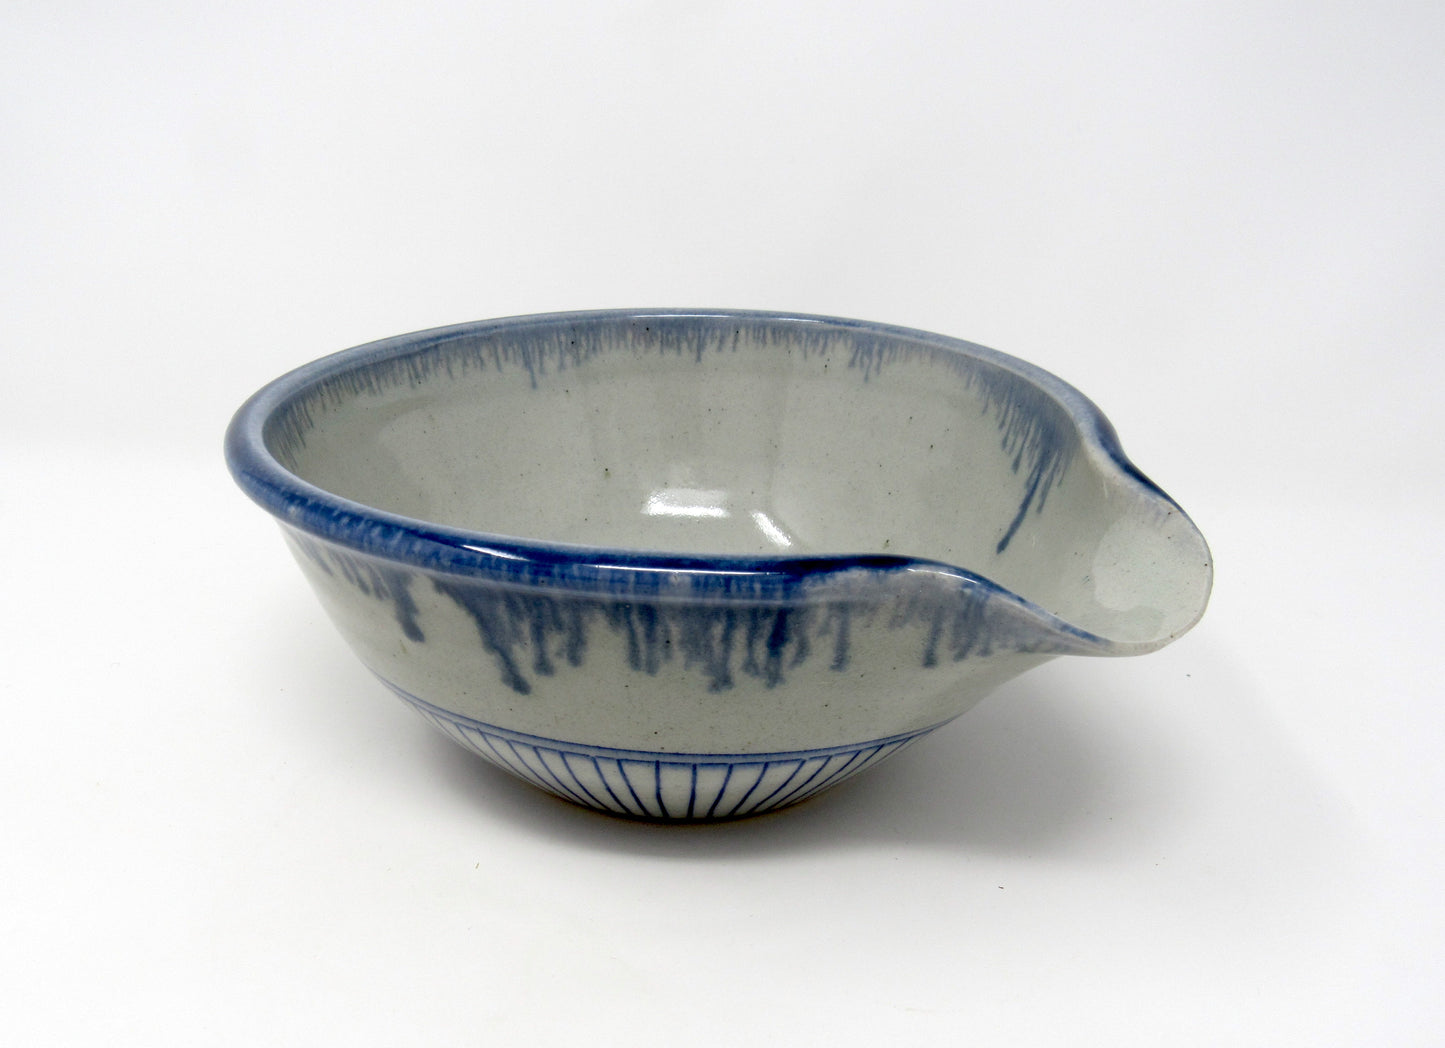 Small Vertical Striped Batter Bowl in Blue